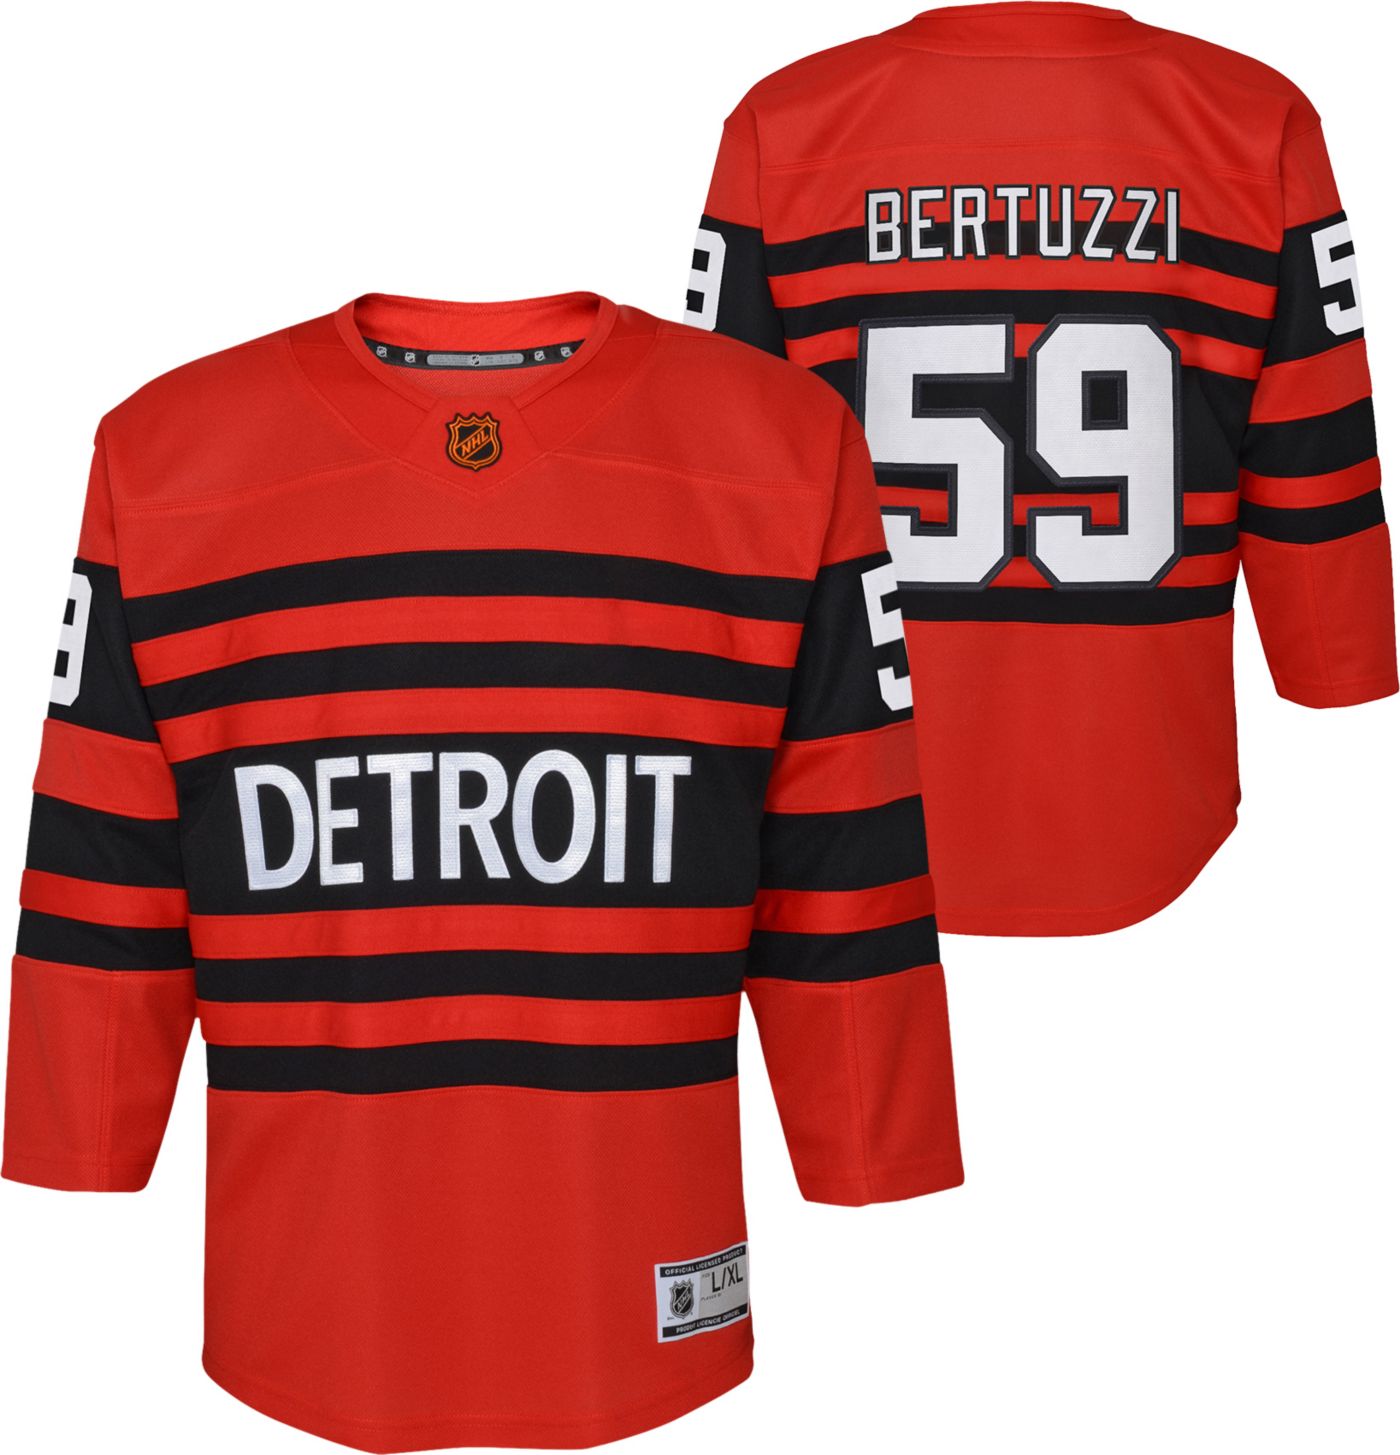 NHL on X: A new look in Hockeytown. 🤩 This #ReverseRetro jersey honors  Detroit's 1991 NHL 75th anniversary threads with a DETROIT wordmark  inspired by the 1920 Detroit Cougars uniform. A black